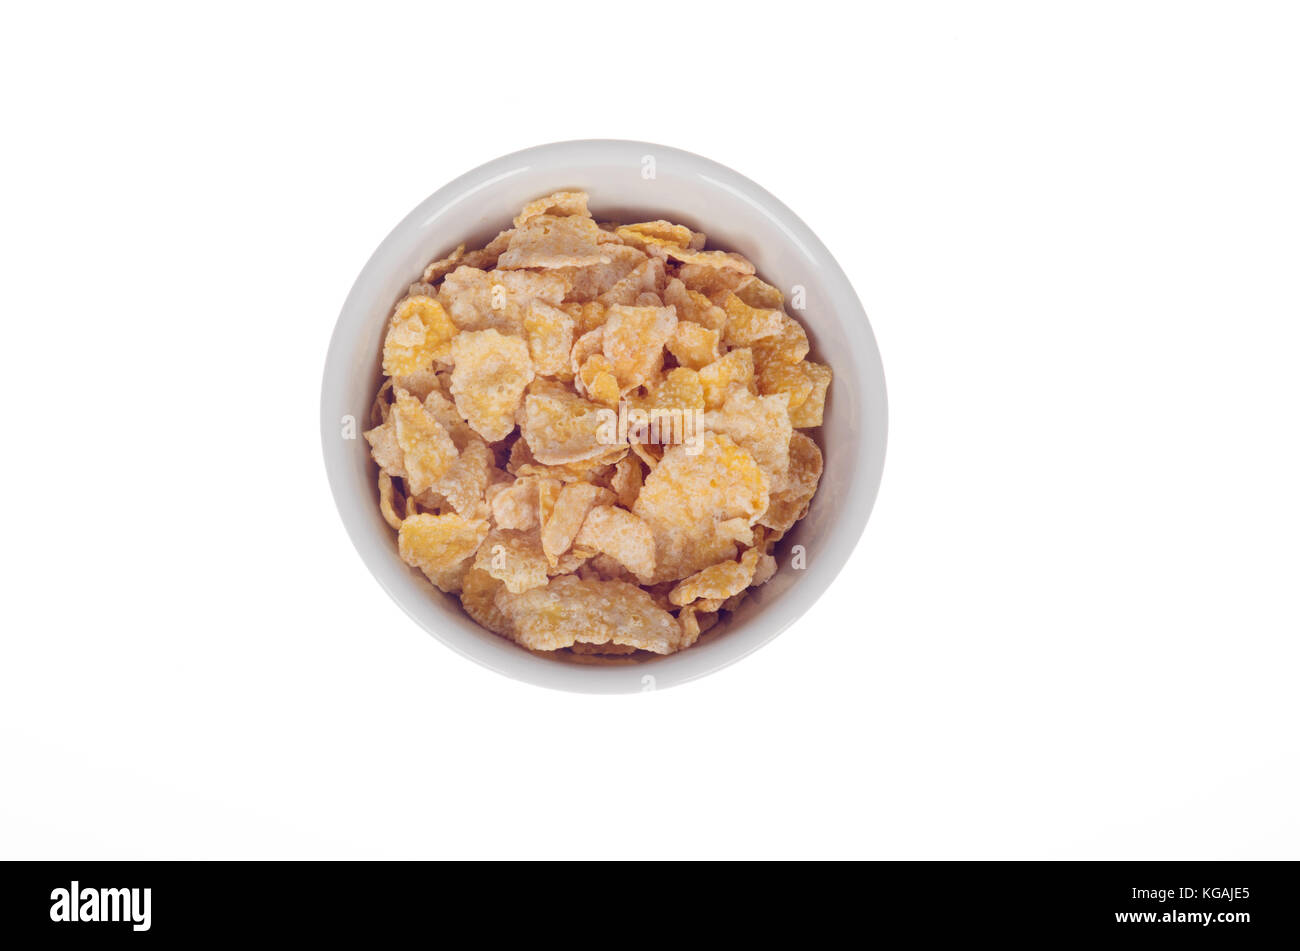 Bowl of Kellogg's Frosted Flakes or Frosties sugar coated corn flakes cereal in bowl isolated from above on white background Stock Photo